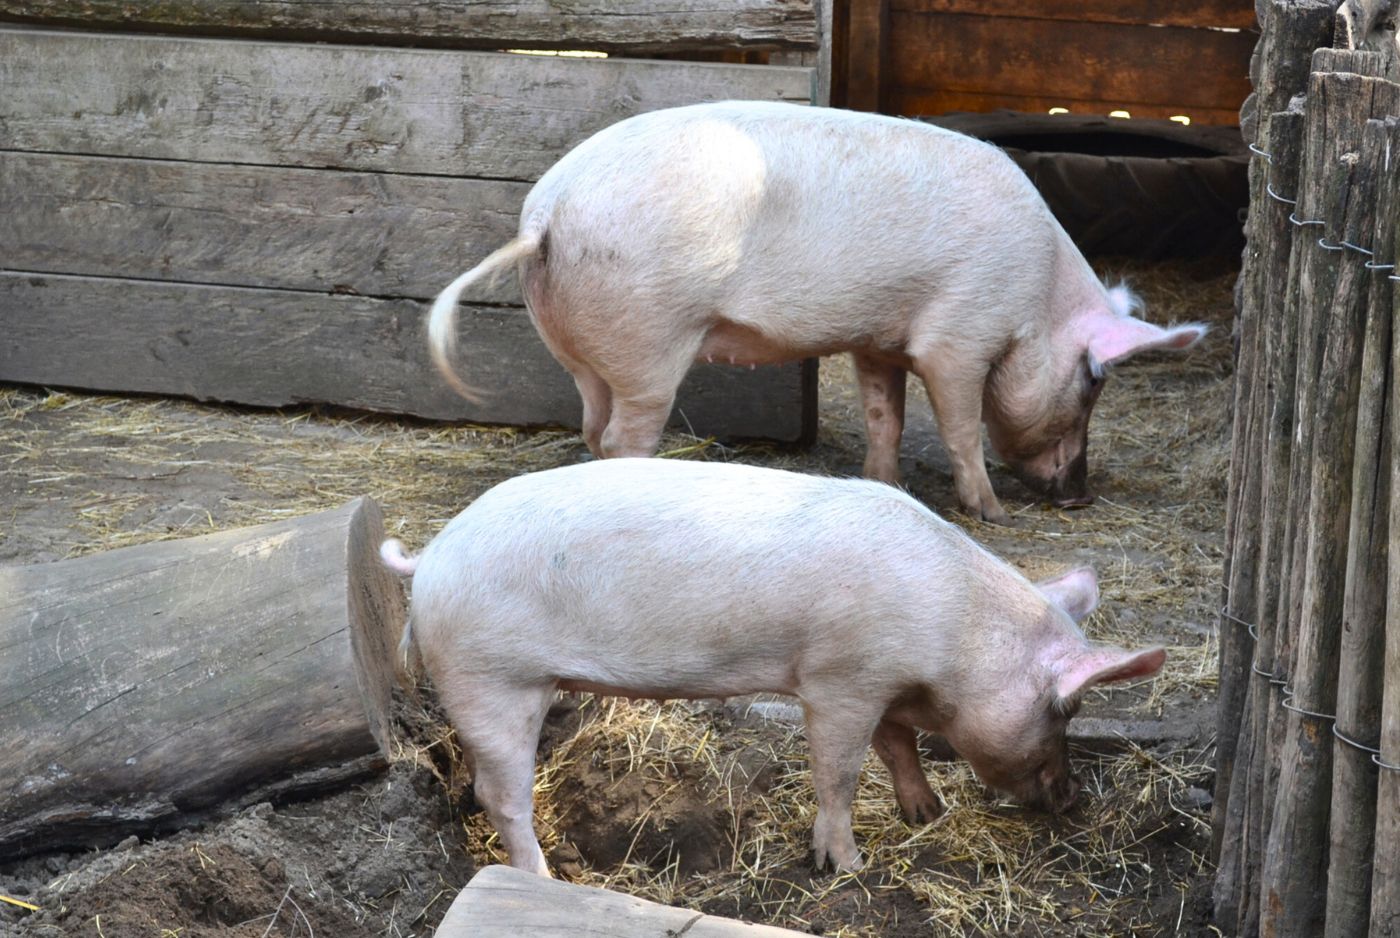 Two large white pigs